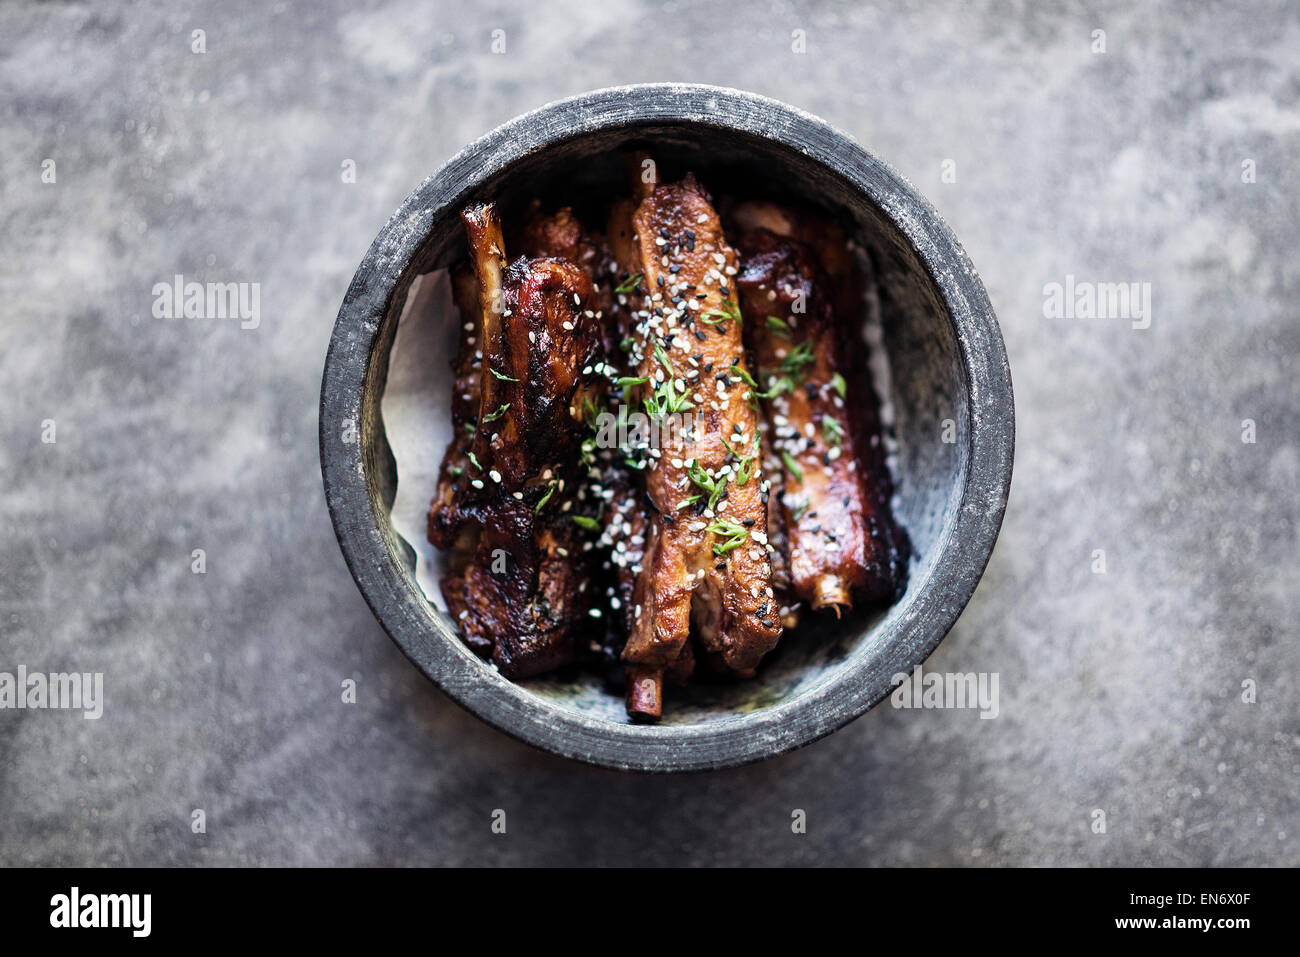 grilled marinated pork ribs with asian sweet sesame sauce Stock Photo